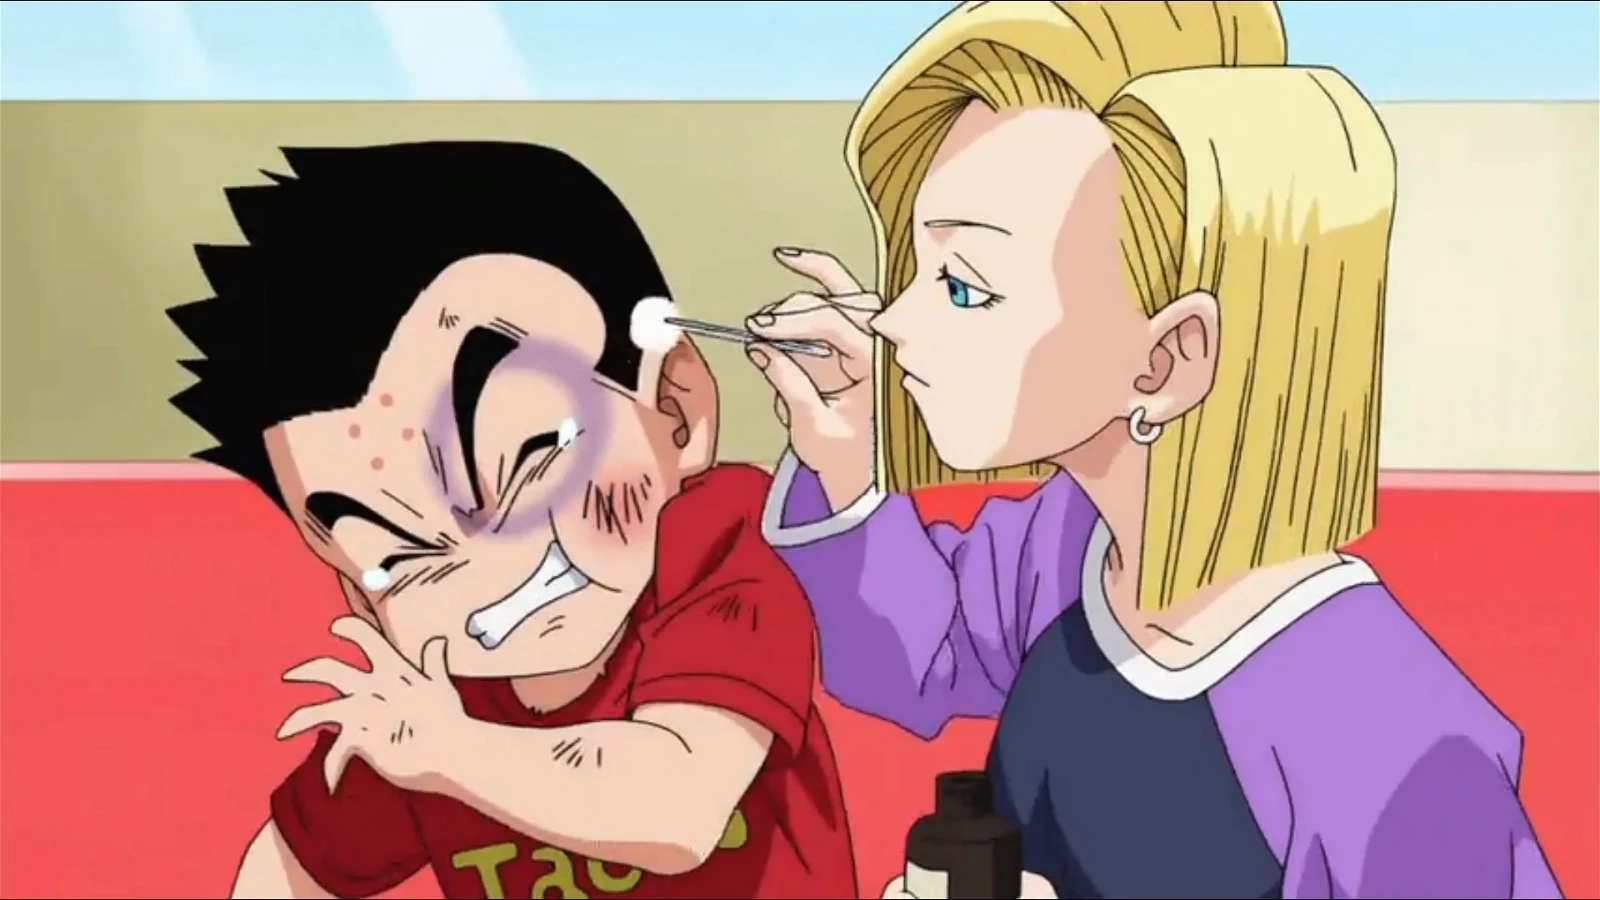 Krillin and Android 18 | Toei Animation